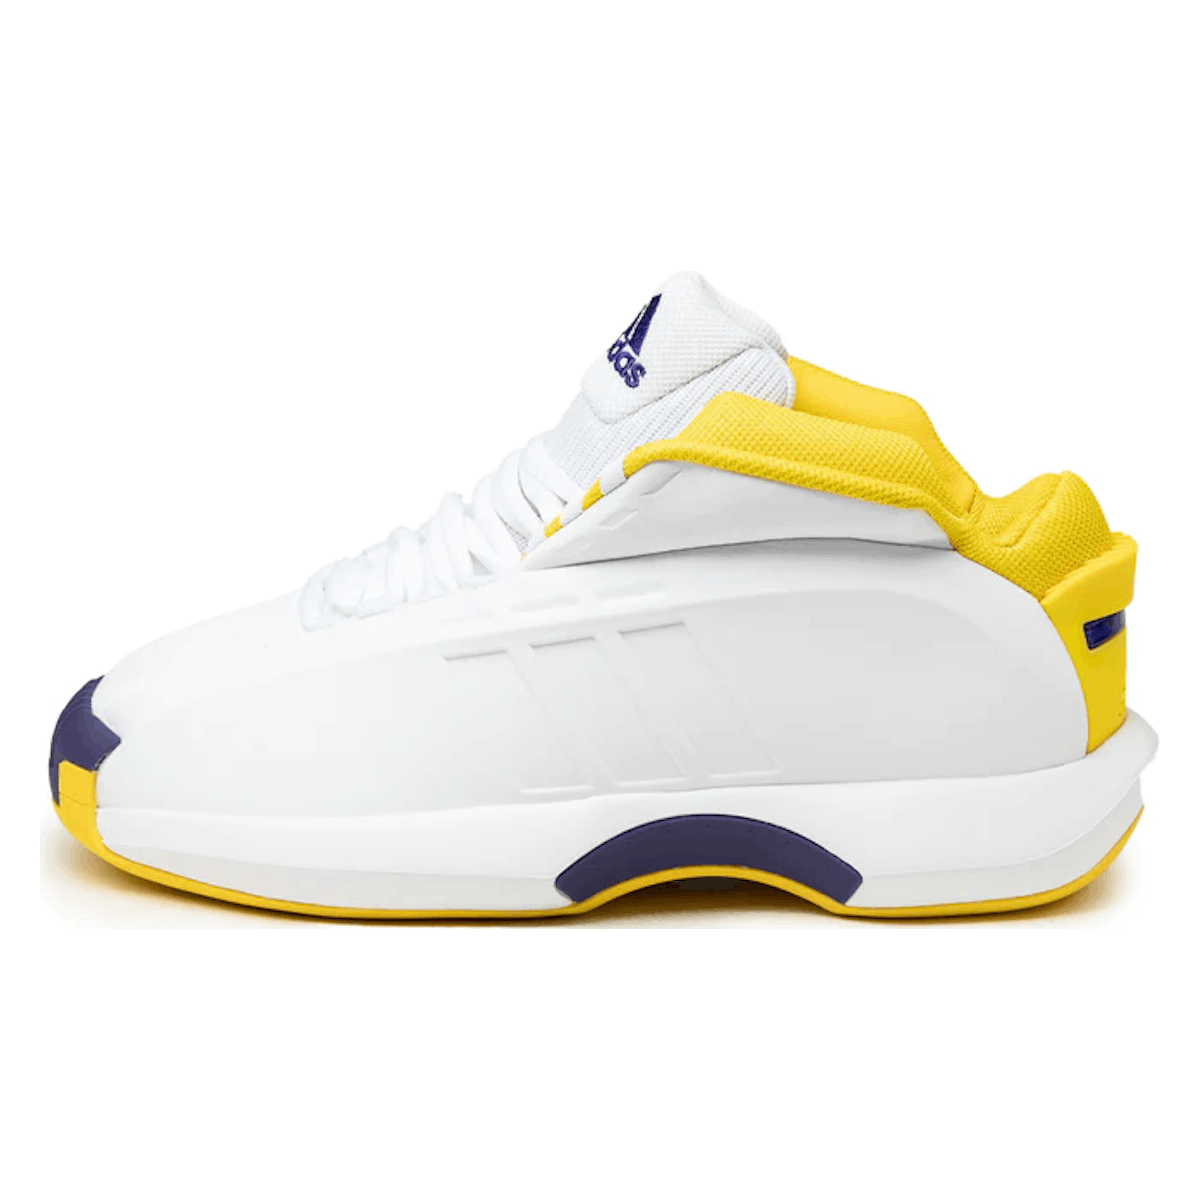 Adidas Crazy 1 "Lakers"